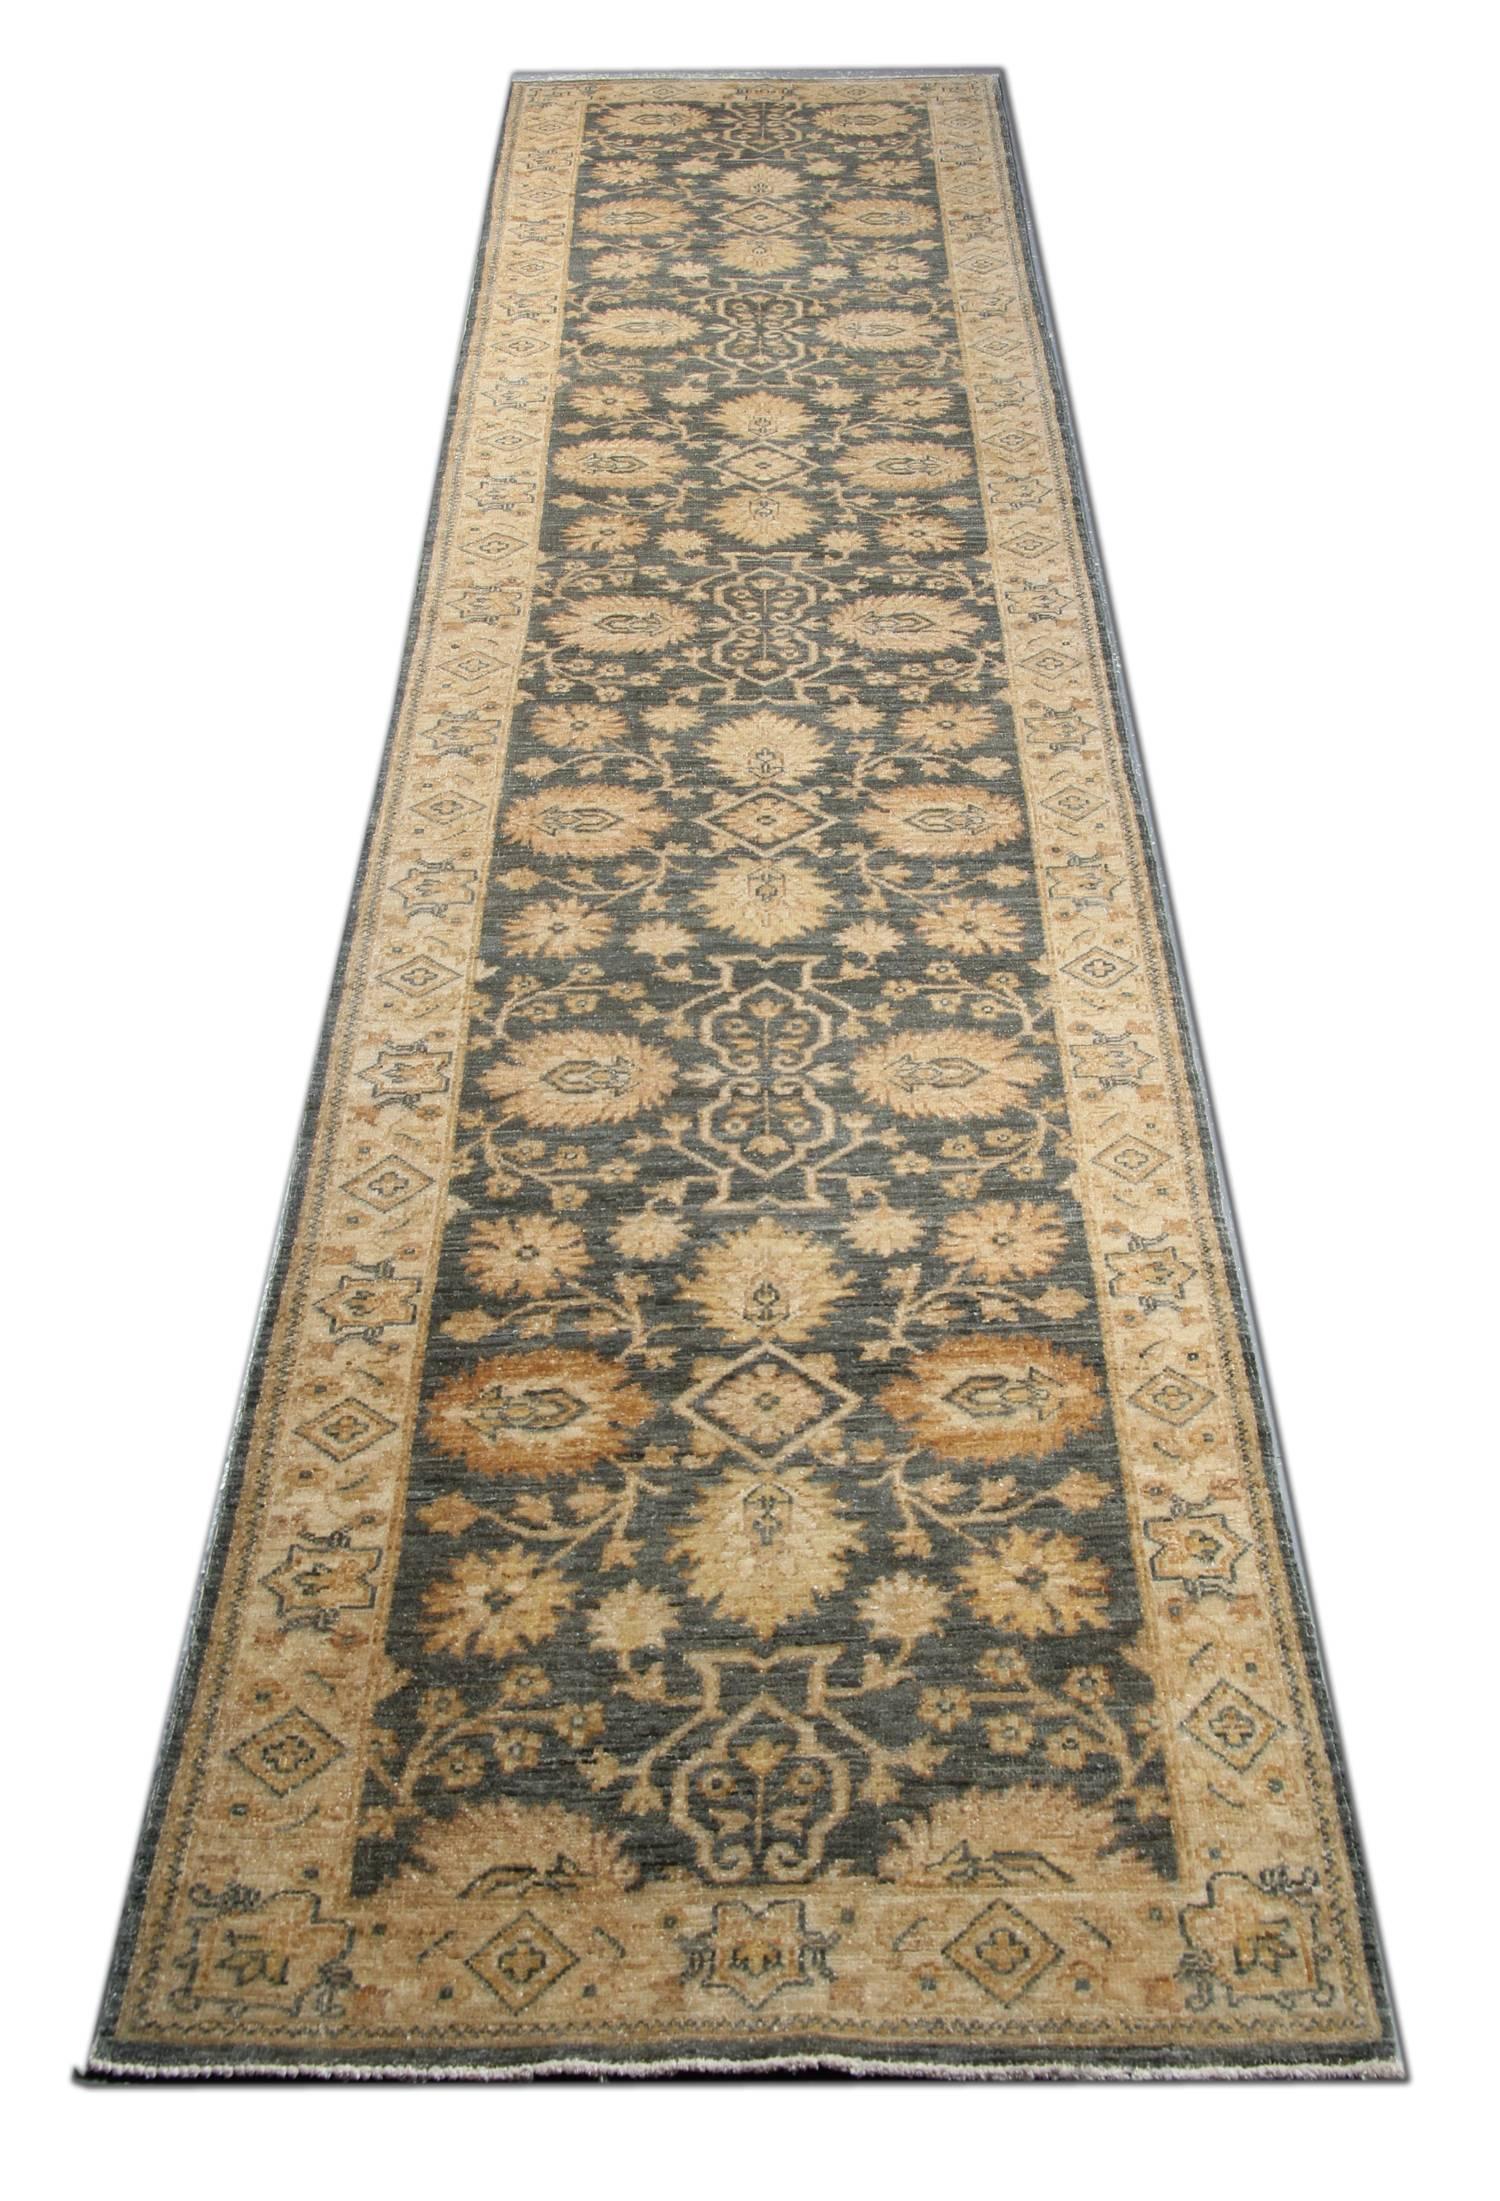 This modern Ziegler style Runner rug features a traditional Saltanabad design. Woven on a loom in Afghanistan by master weavers. Woven with the finest hand-spun wool, which has been dyed using traditional organic vegetable dying techniques. The